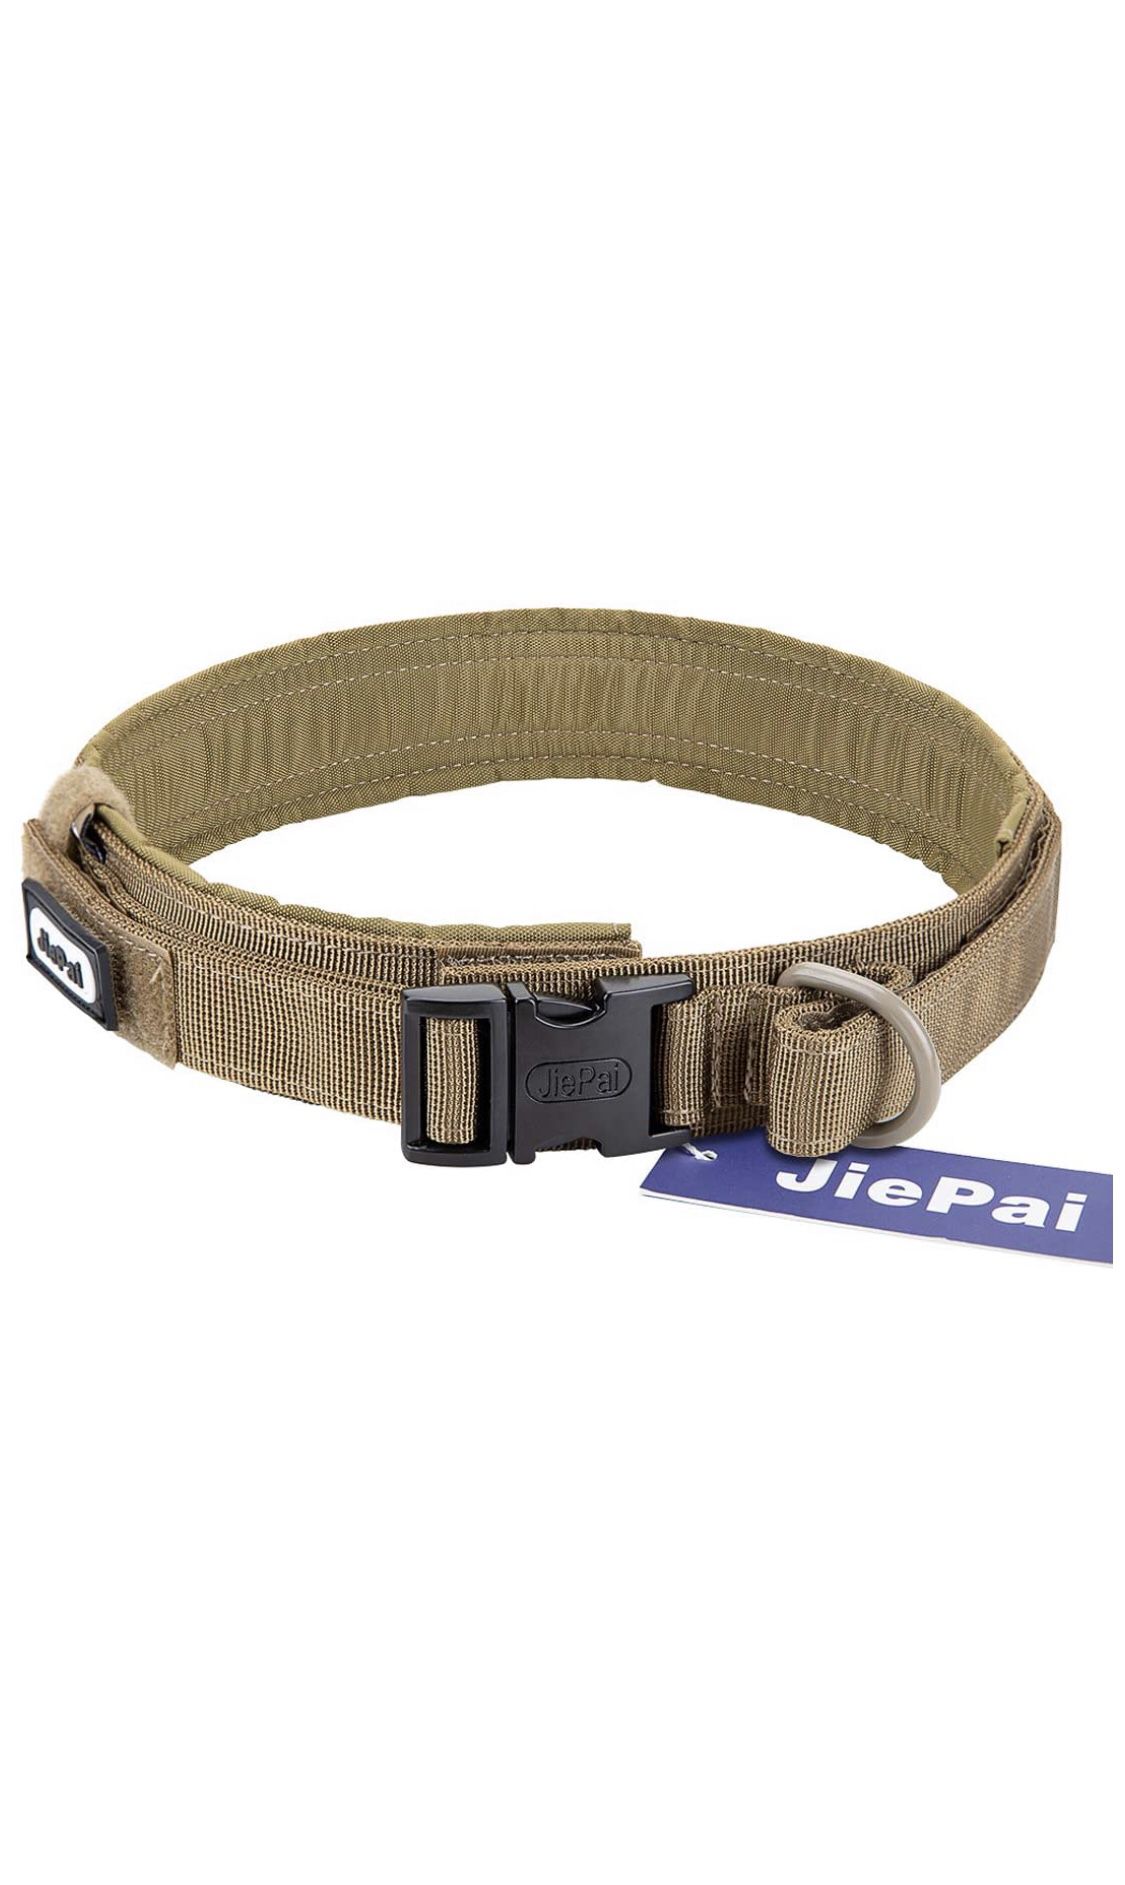 Tactical Dog Collar Military Training Nylon Adjustable Dog Collar with Control Handle for Medium Dogs